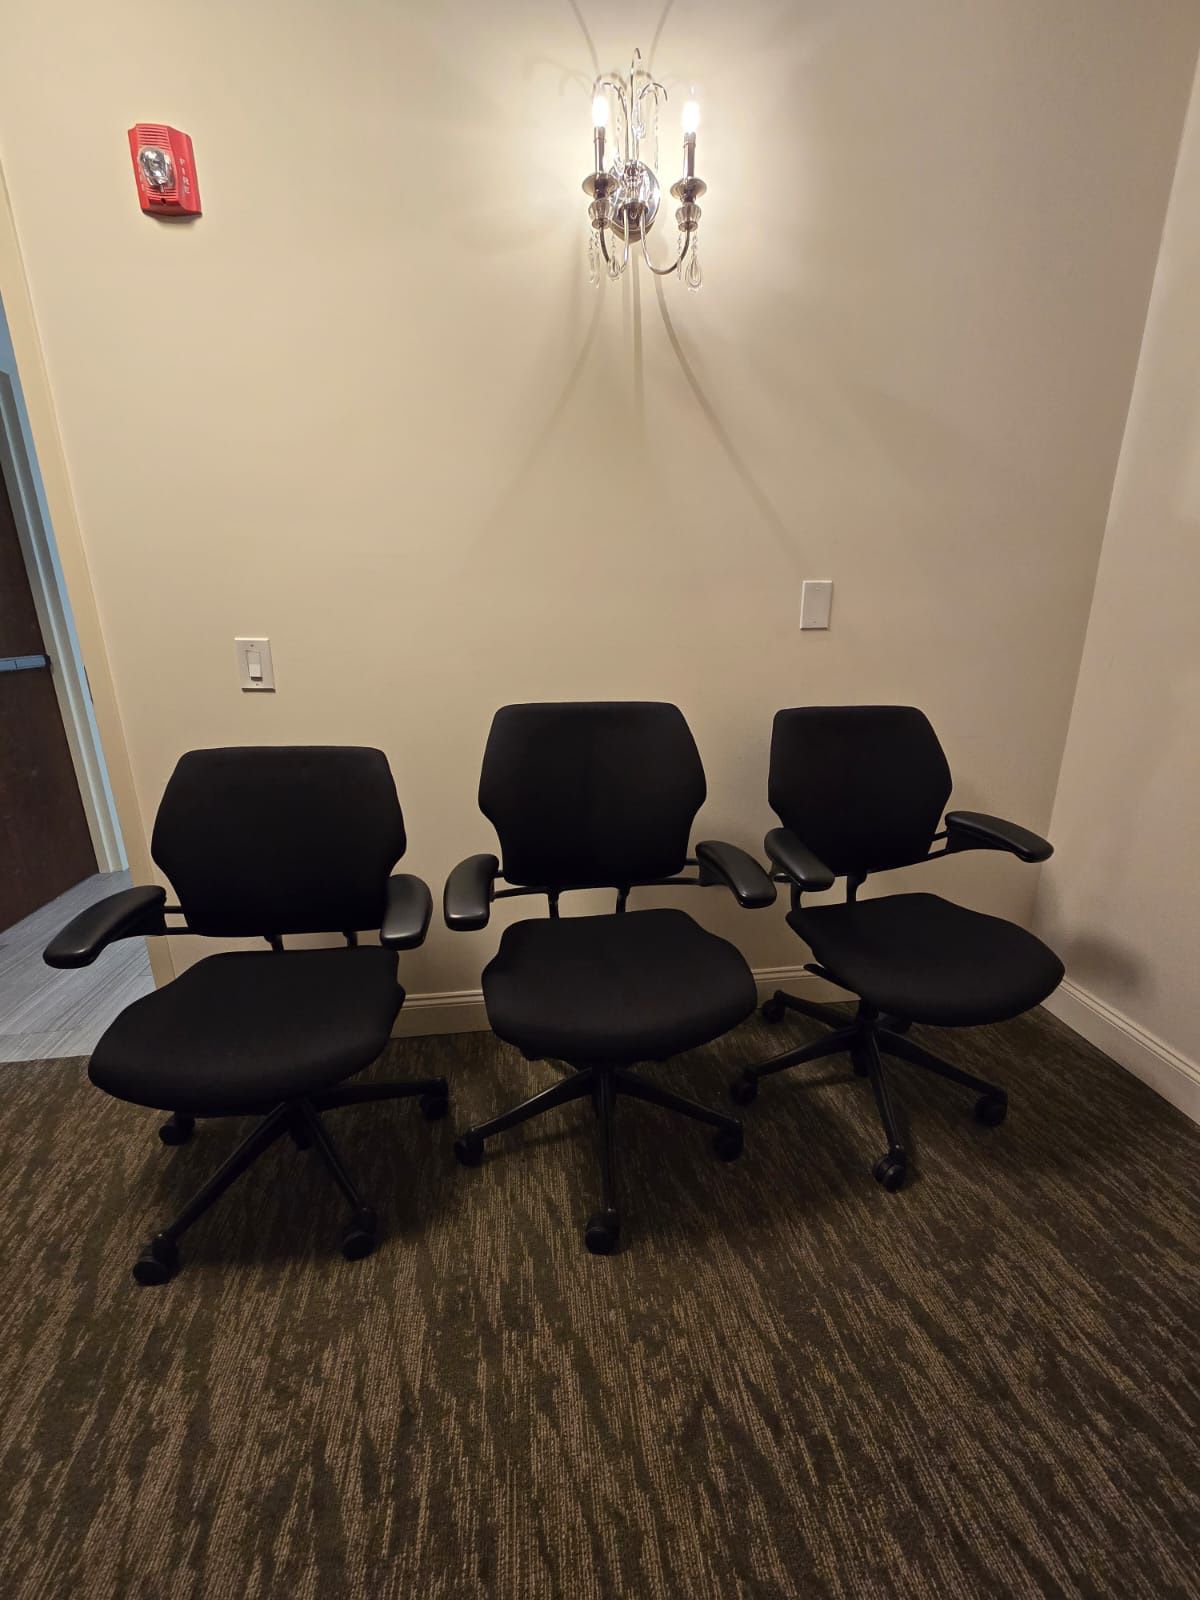 Set of 3 Black Office Chairs